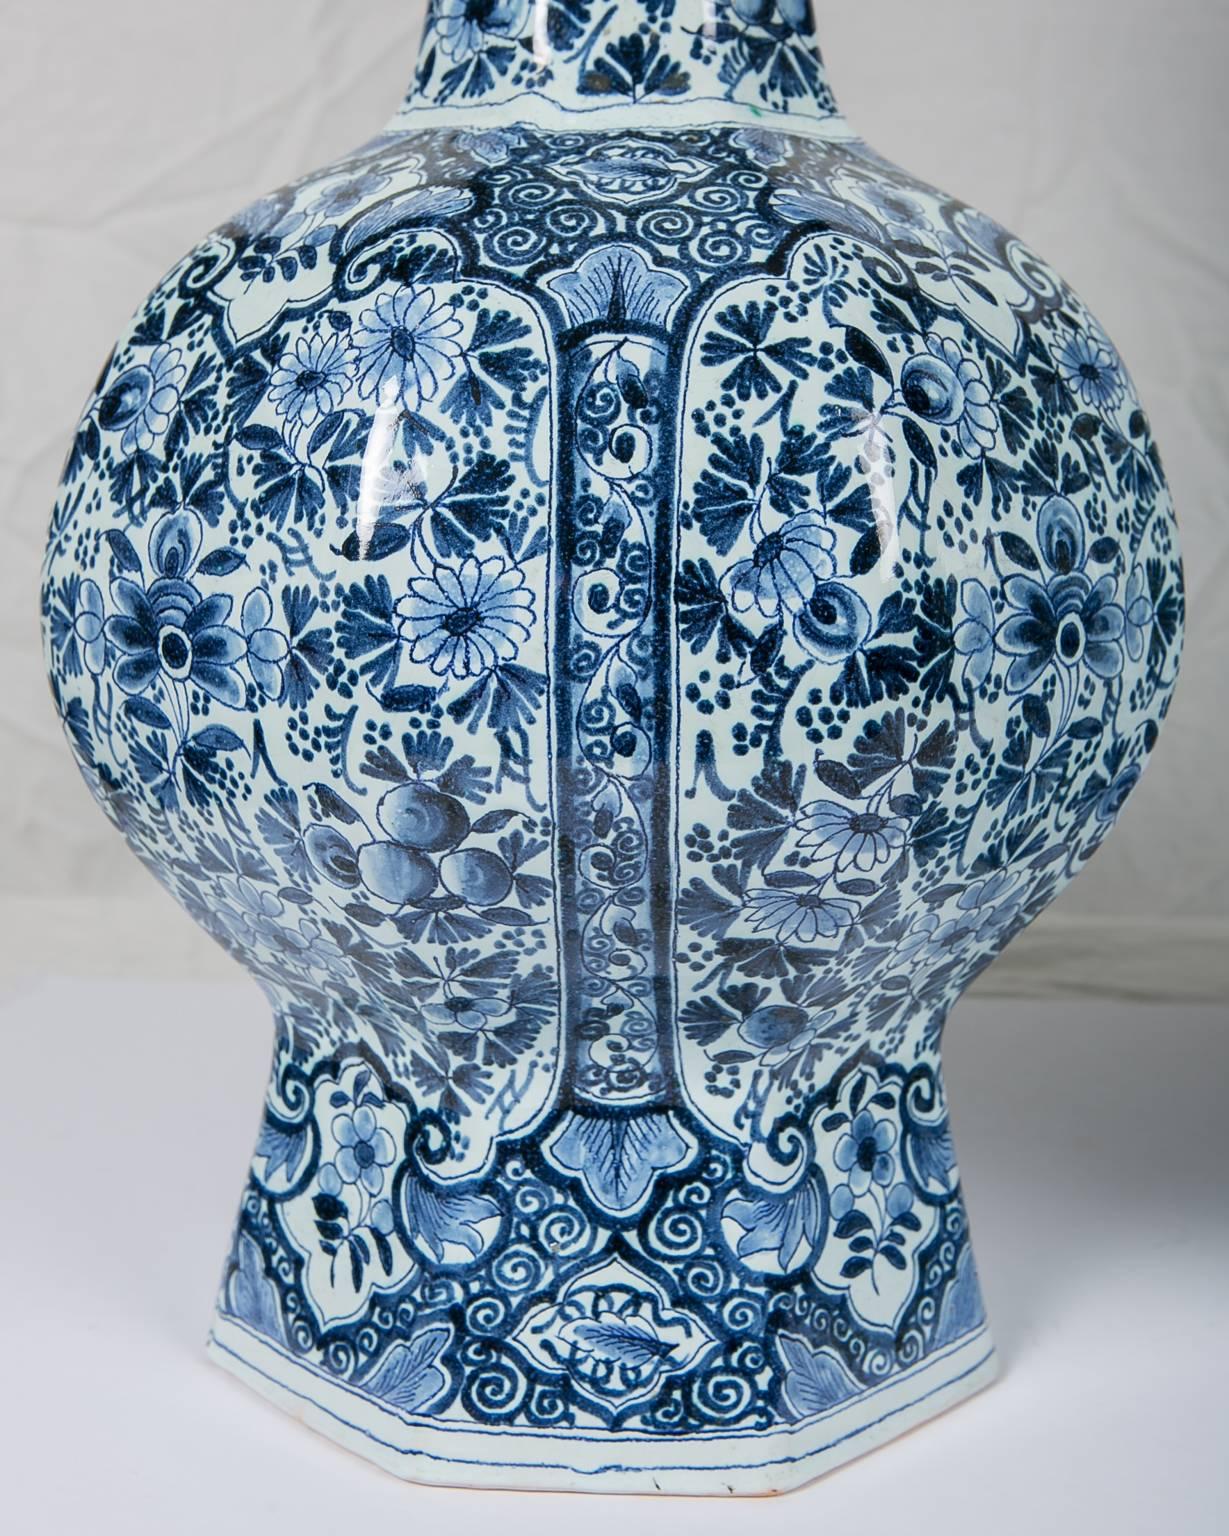 Hand-Painted Blue and White Delft Vases Made circa 1850